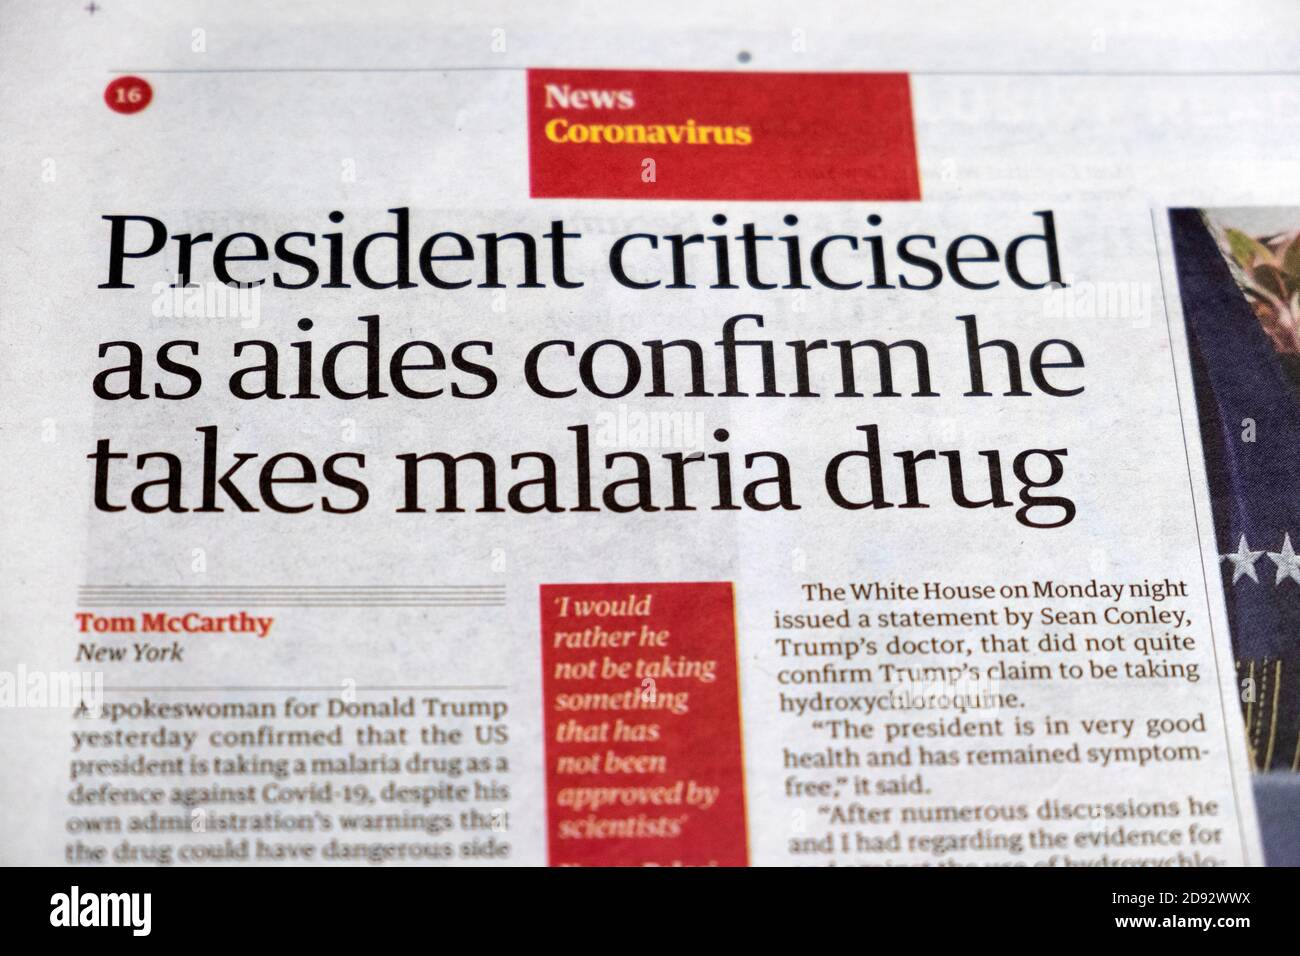 Donald Trump 'President criticised as aides confirm he takes malaria drug' Guardian newspaper headline clipping on 20 May 2020 London England UK Stock Photo